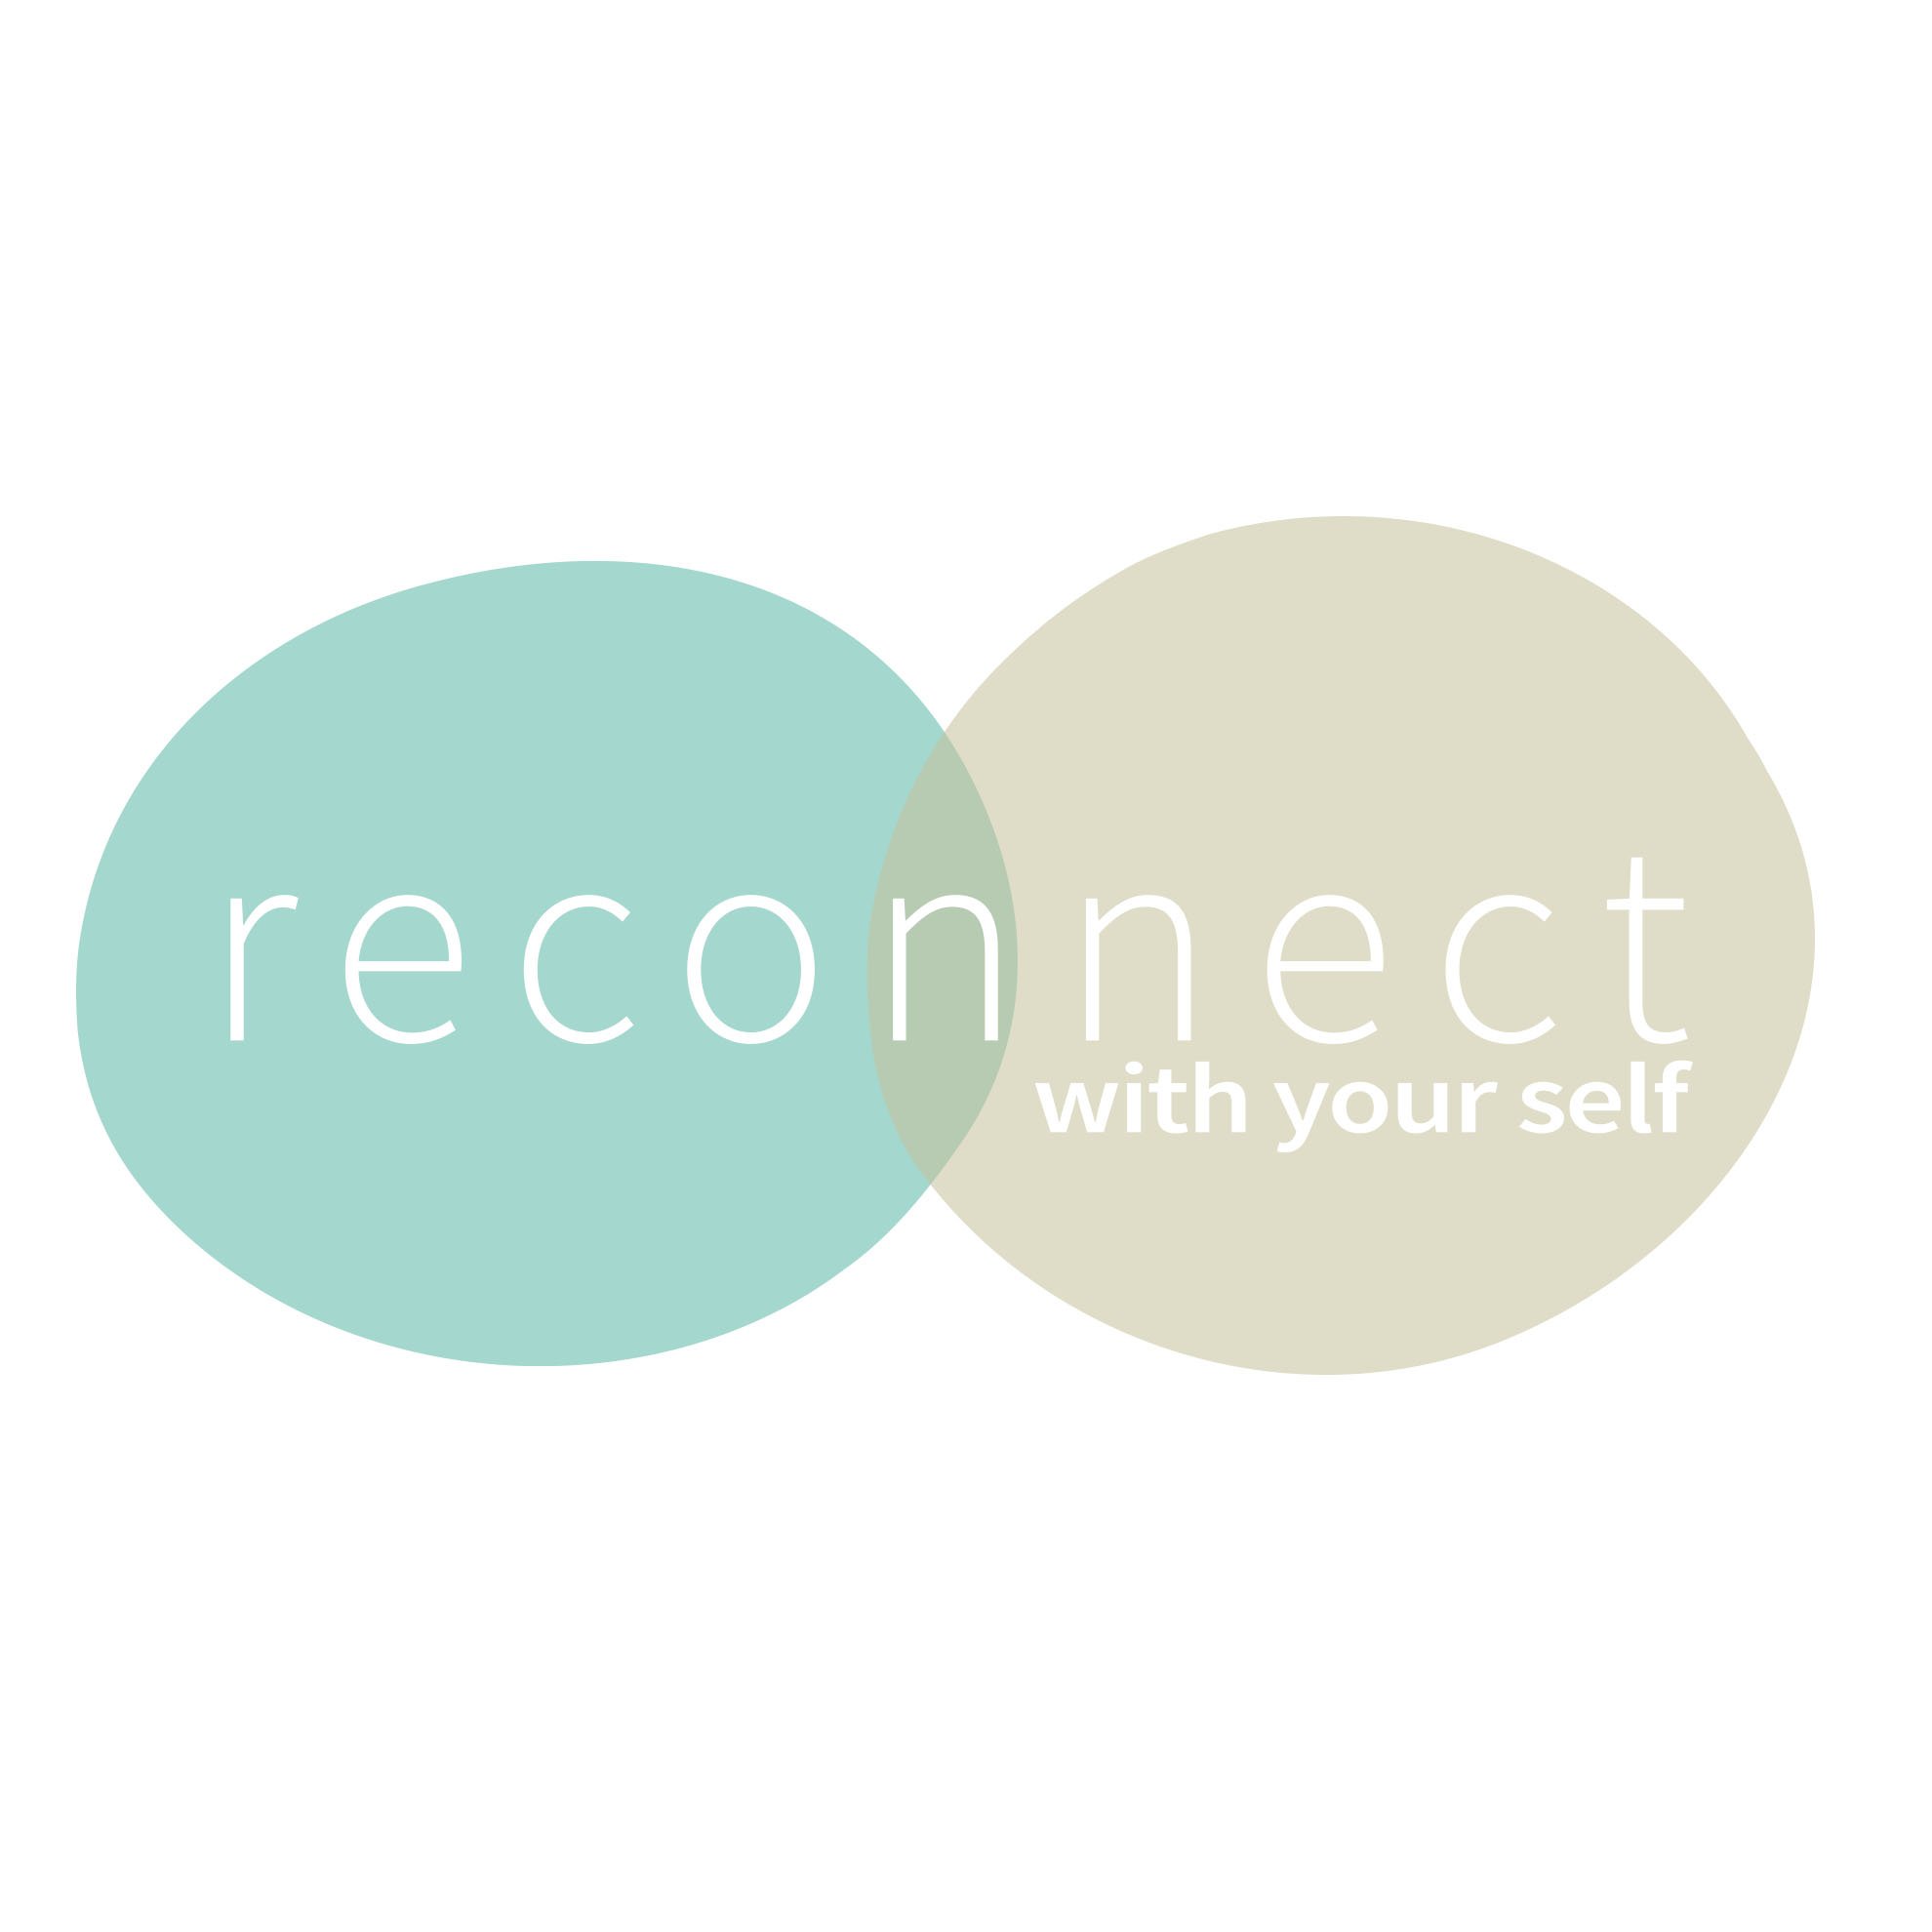 reconnect.jpg